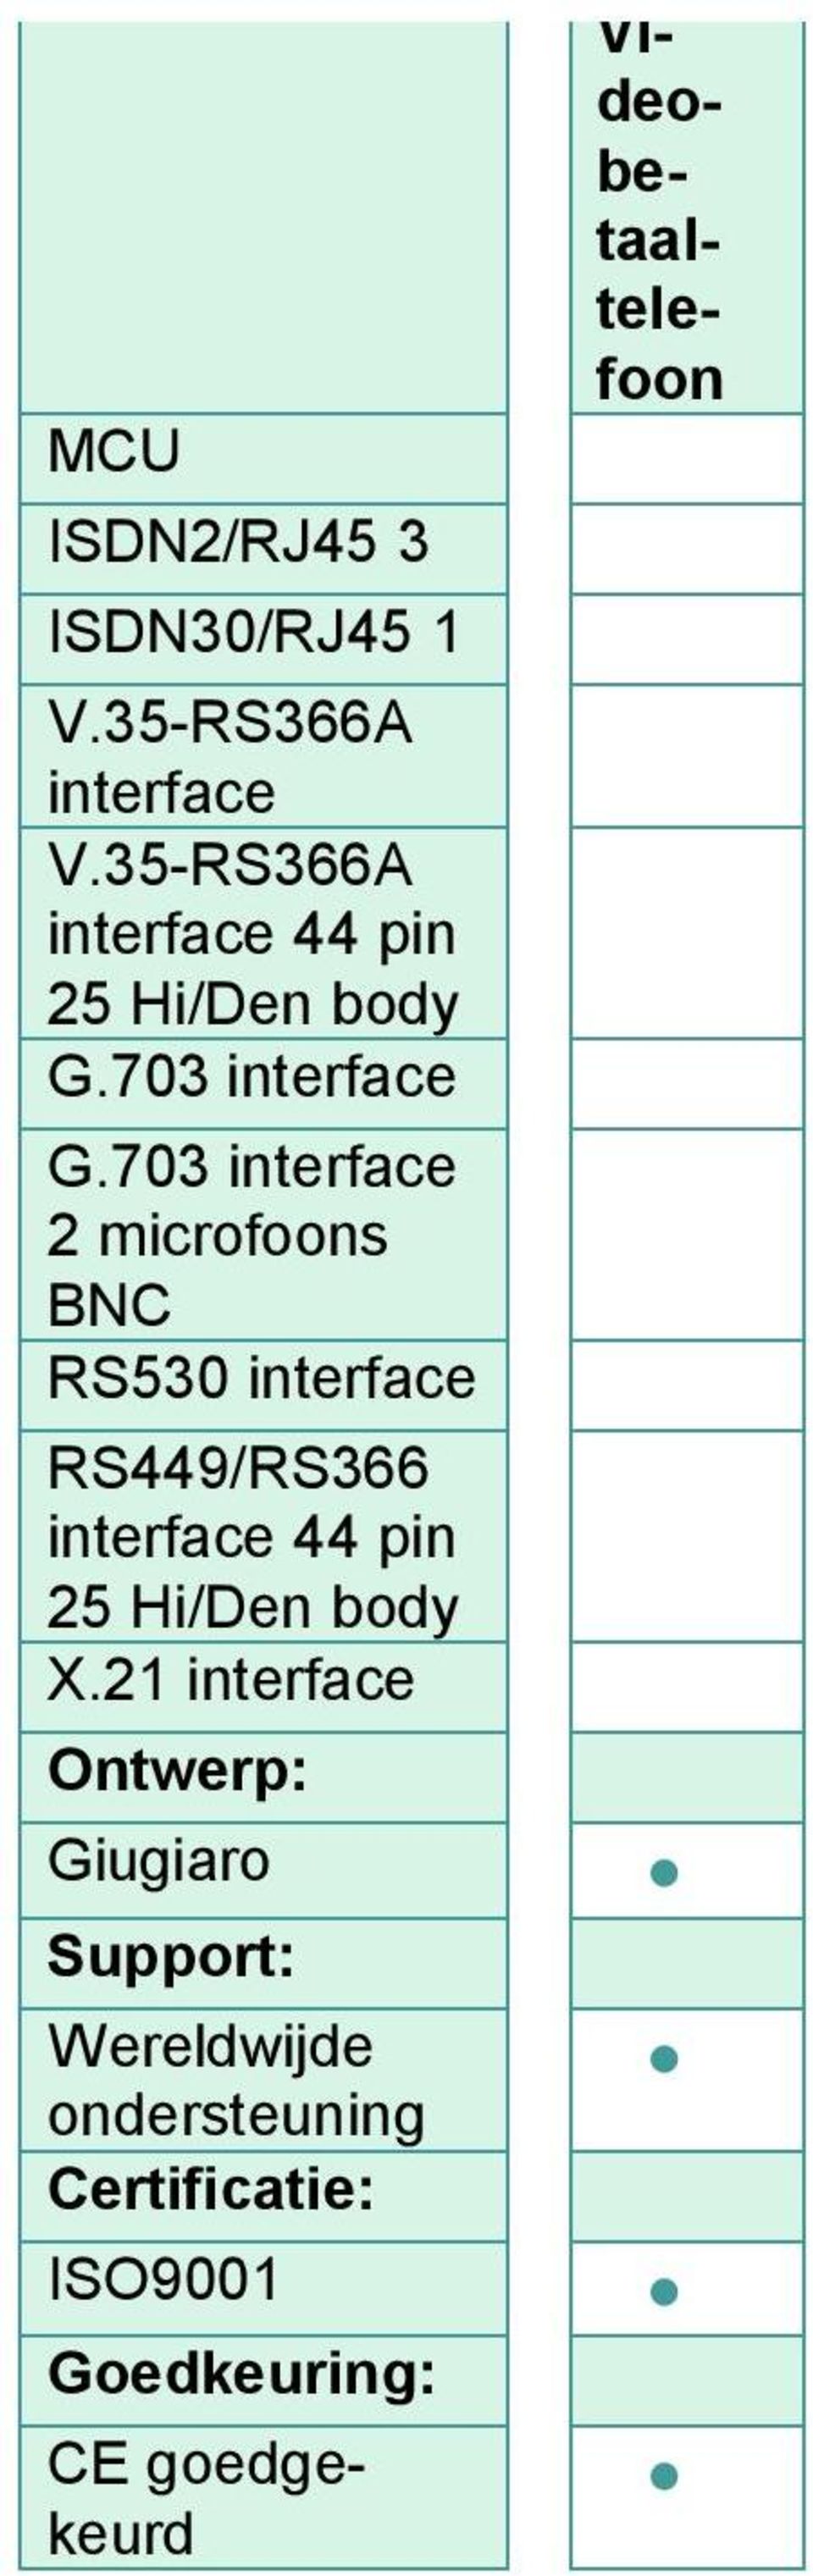 703 interface 2 microfoons BNC RS530 interface RS449/RS366 interface 44 pin 25